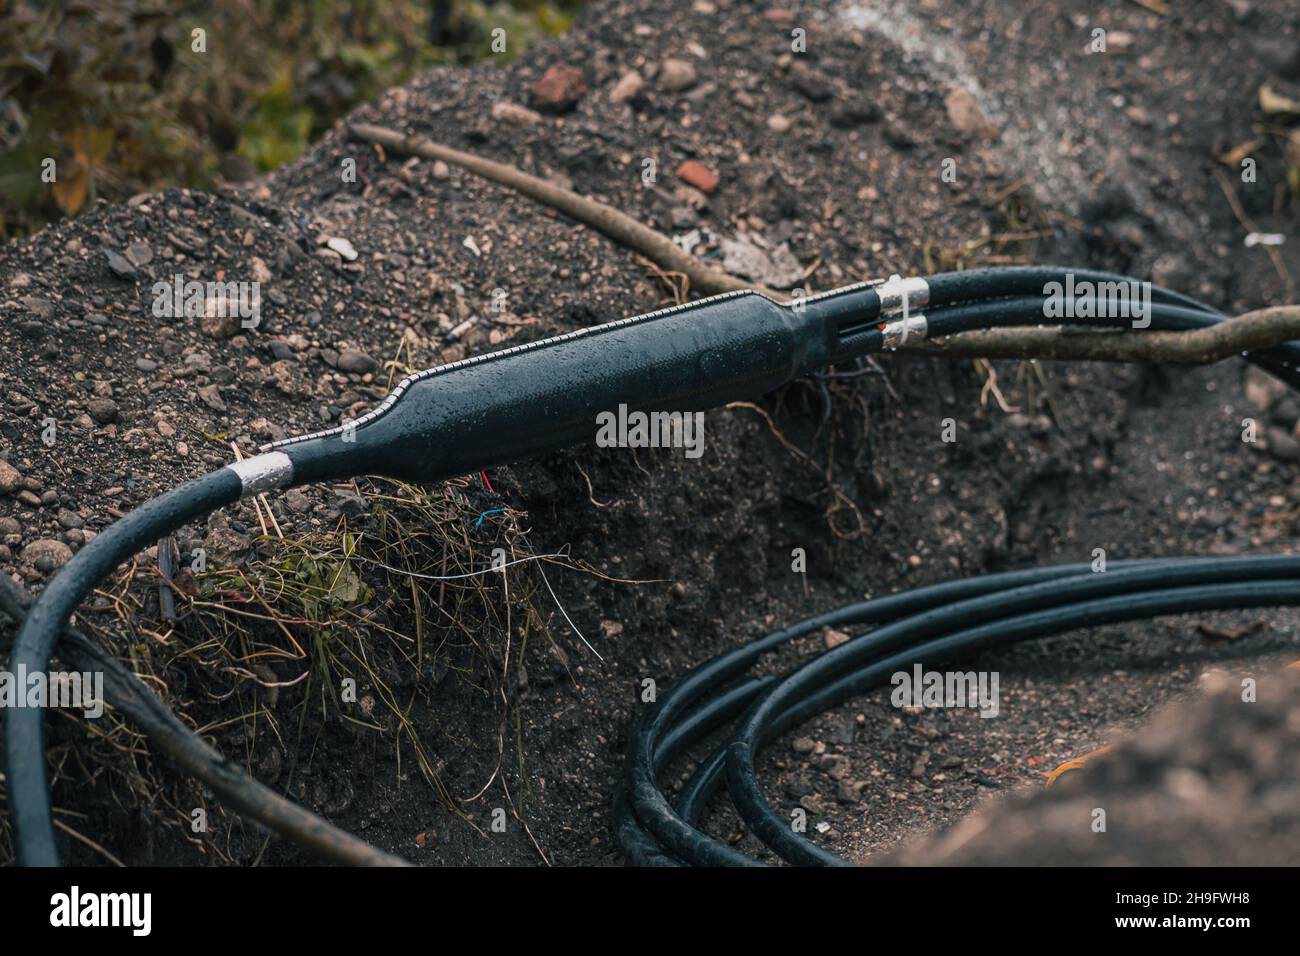 Industrial optical cable connection, Y split of a cable, shielded in a plastic enclosure seen dug up from the ground or trench at a construction site. Stock Photo